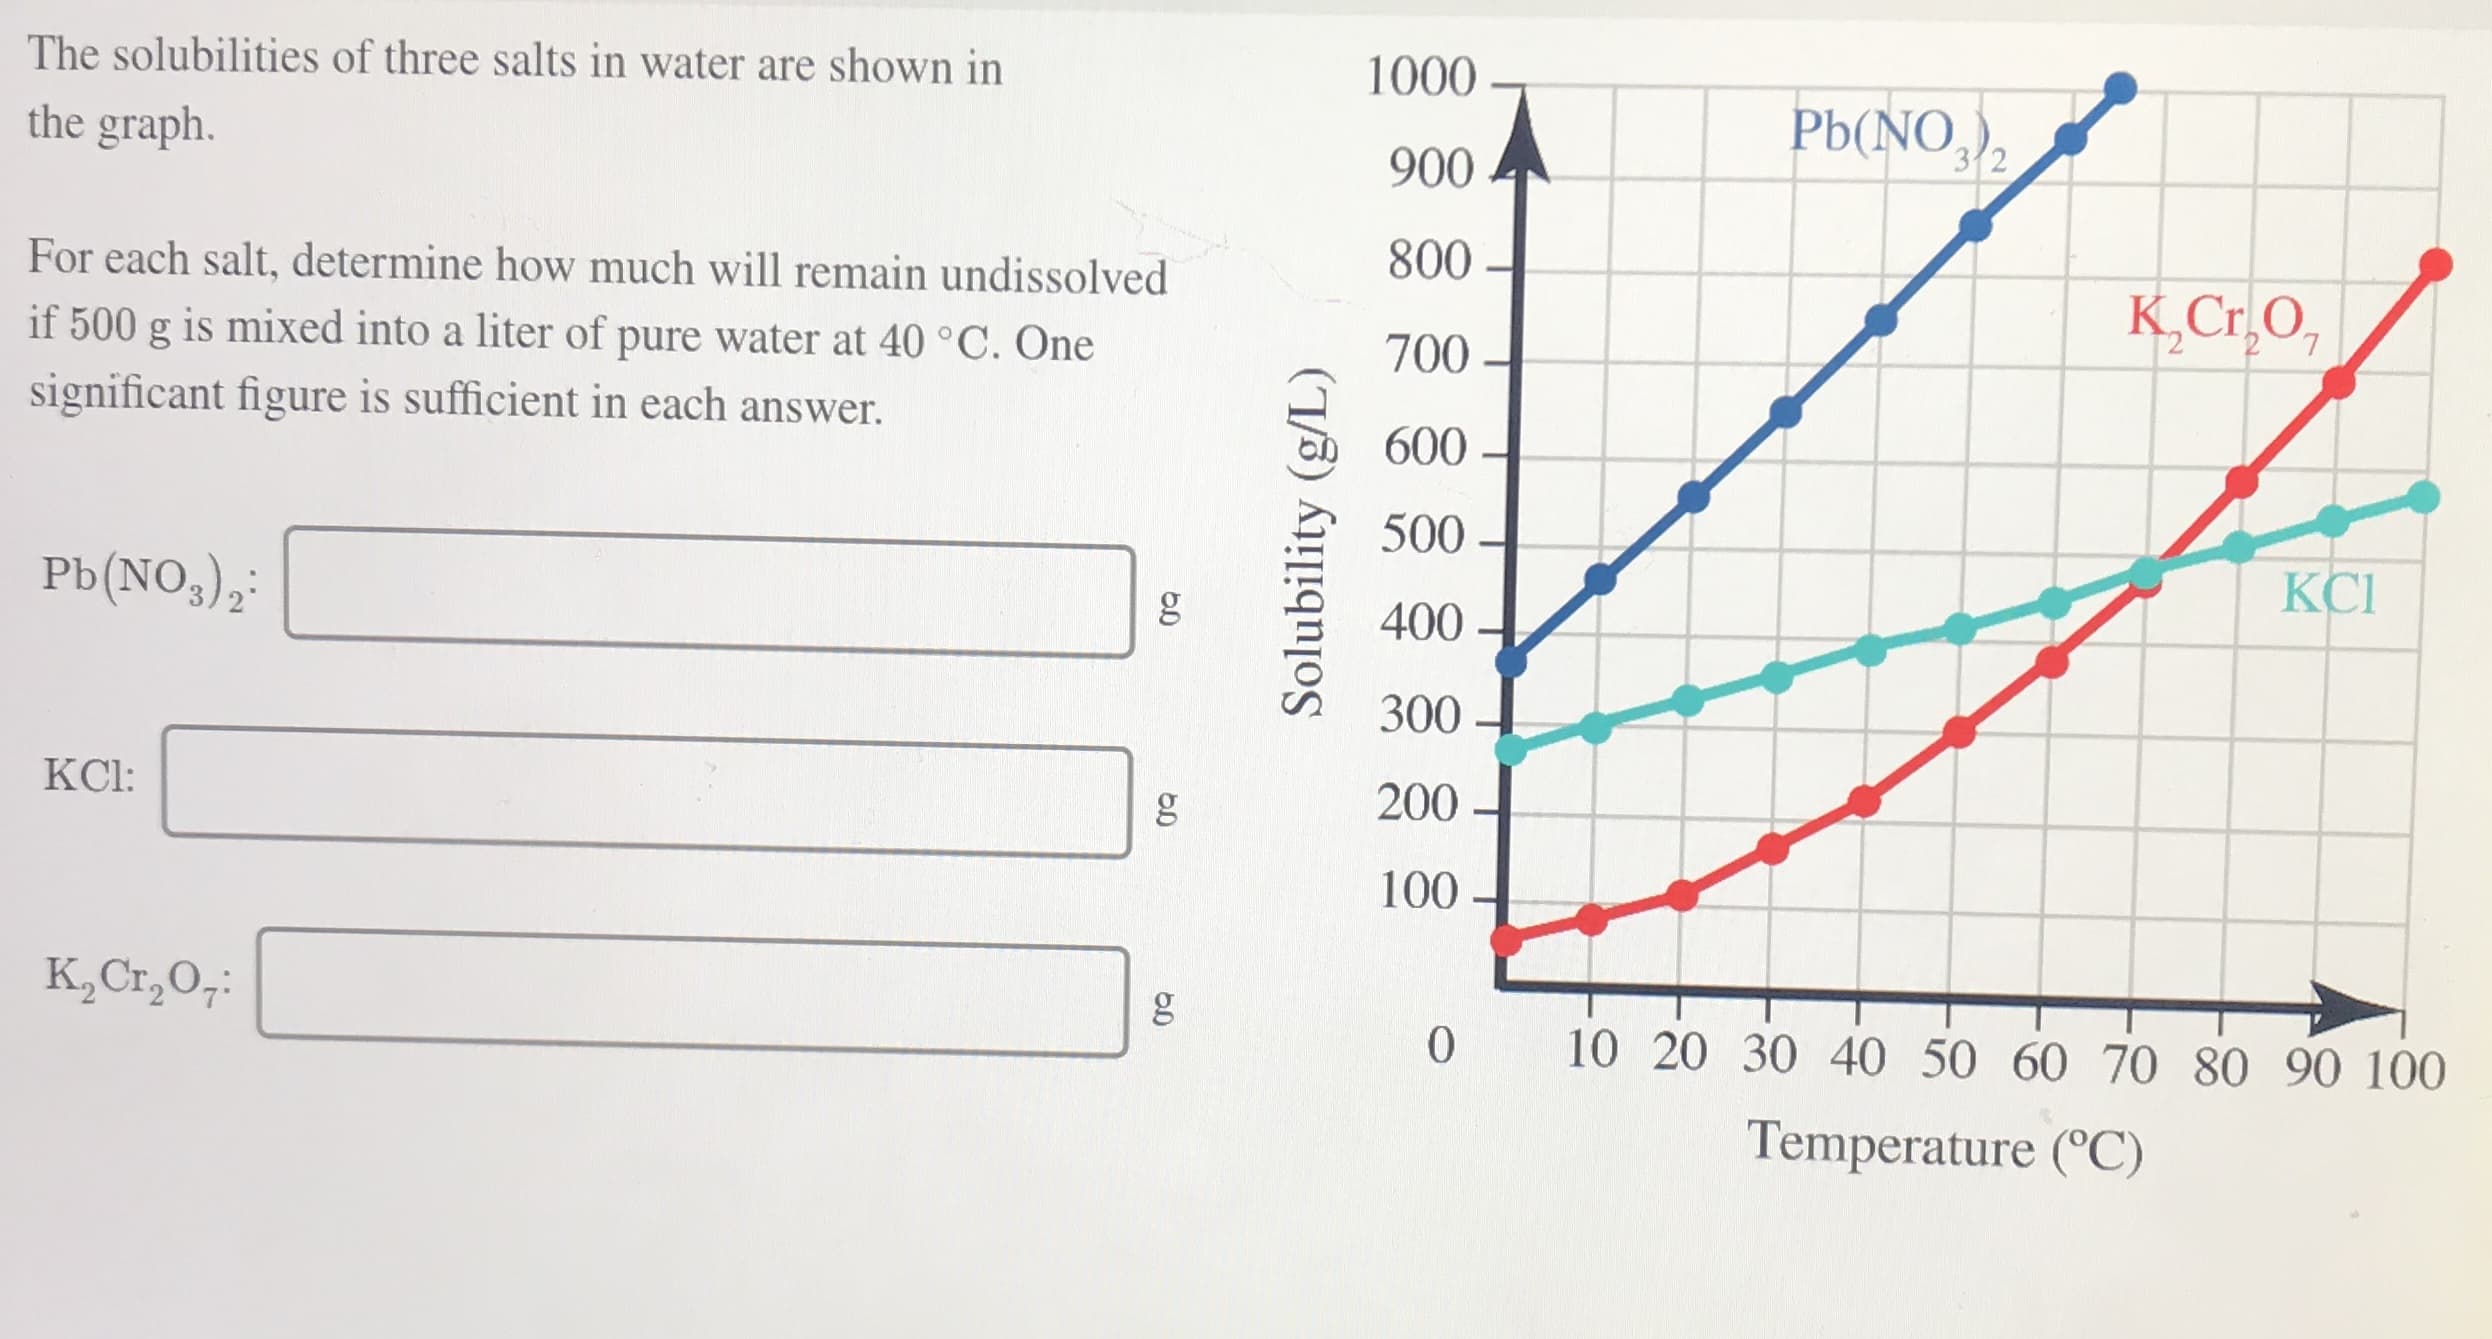 The solubilities of three salts in water are shown in
1000
Pb(NO,)2
the graph.
900
800
For each salt, determine how much will remain undissolved
K,Cr,O,
if 500 g is mixed into a liter of pure water at 40 °C. One
700 -
significant figure is sufficient in each answer.
600
500 -
КСІ
Pb(NO,),:
400
300
KCI:
200
100
K,Cr,0;:
10 20 30 40 50 60 70 80 90 100
Temperature (°C)
Solubility (g/L)
